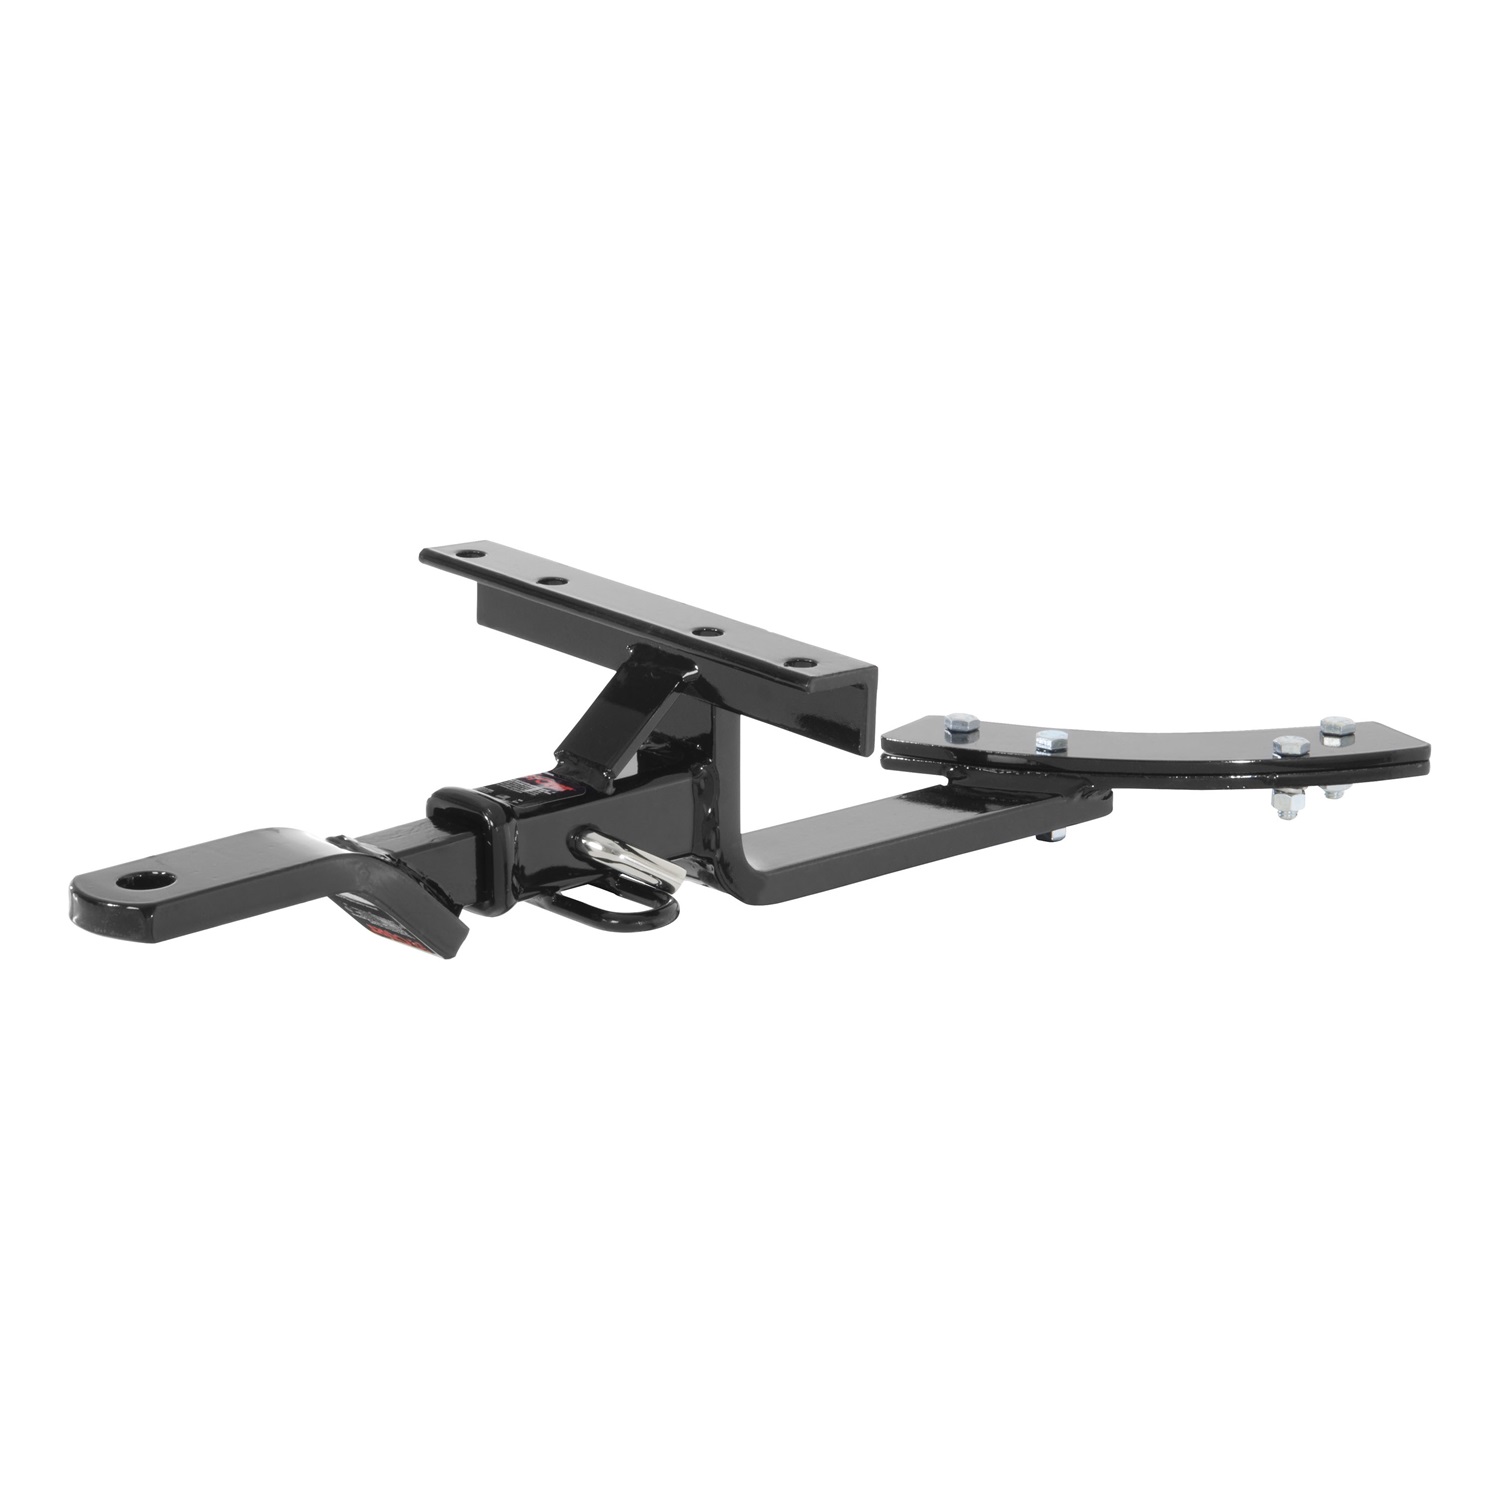 CURT Trailer Hitches - Black - 112373 - image 1 of 4